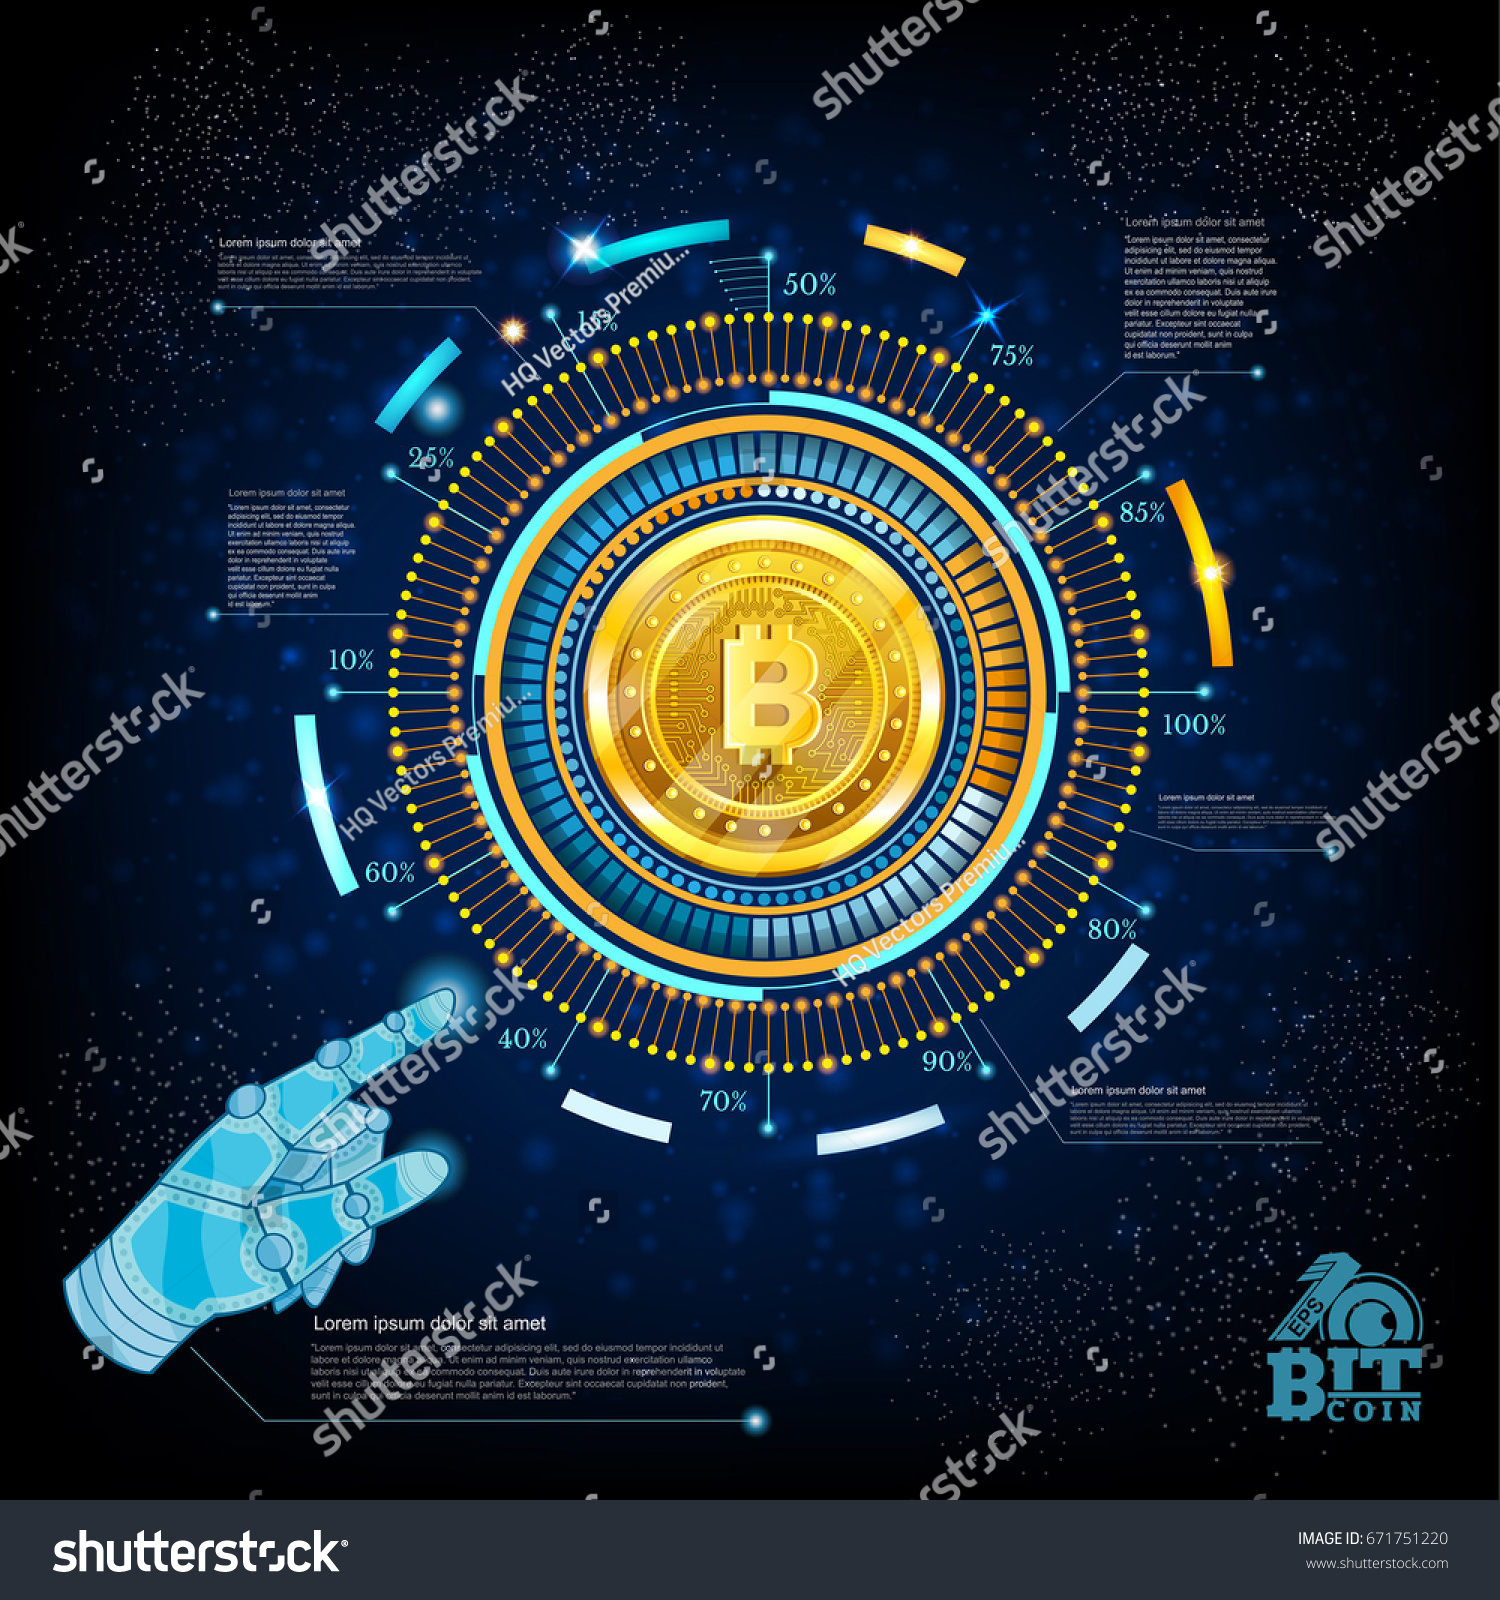 SVG of Golden bit coin in center of round high tech futuristic info graphic on blue background  svg